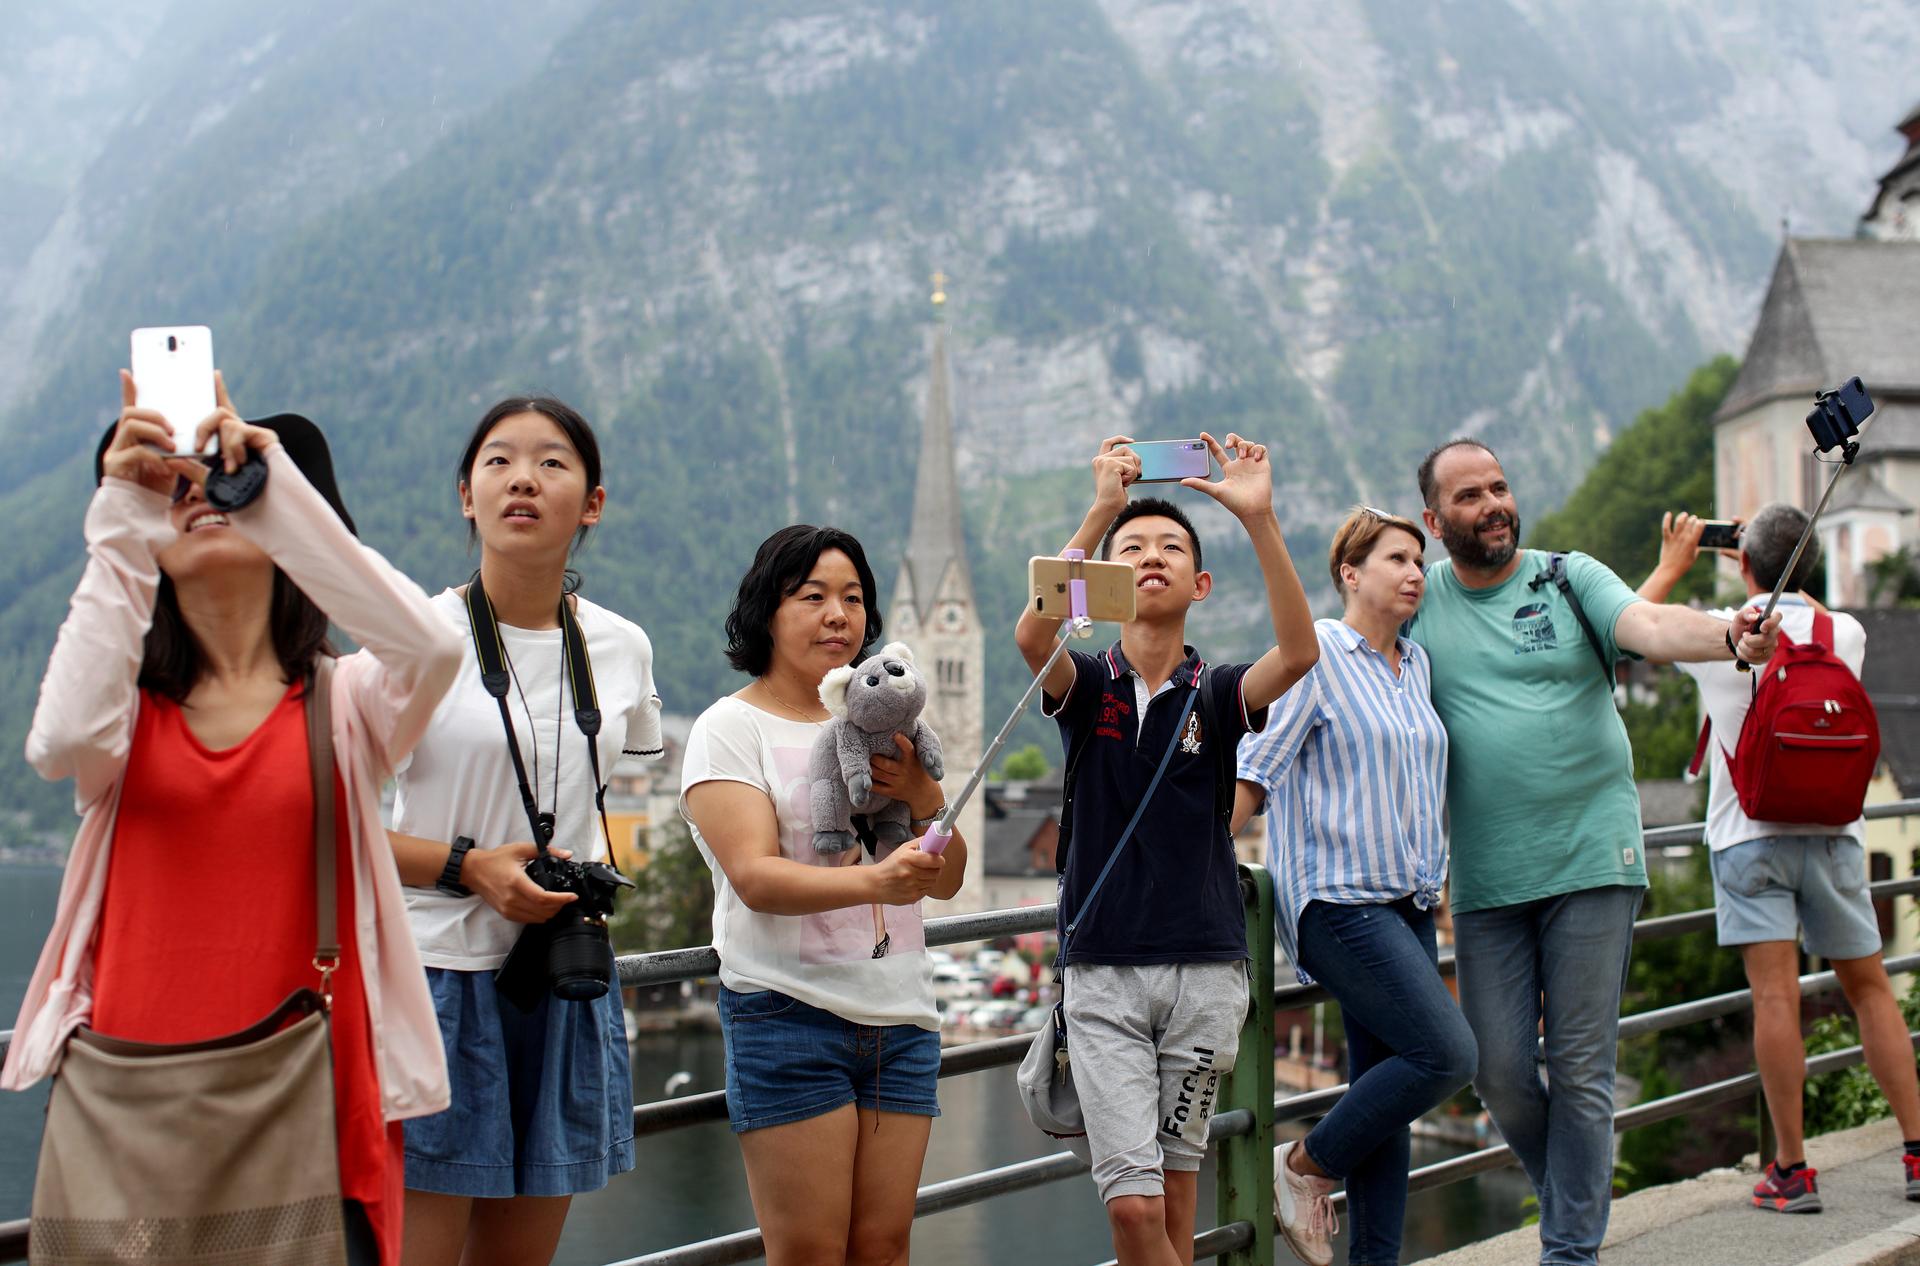 A group of tourists stands taking selfies outside.